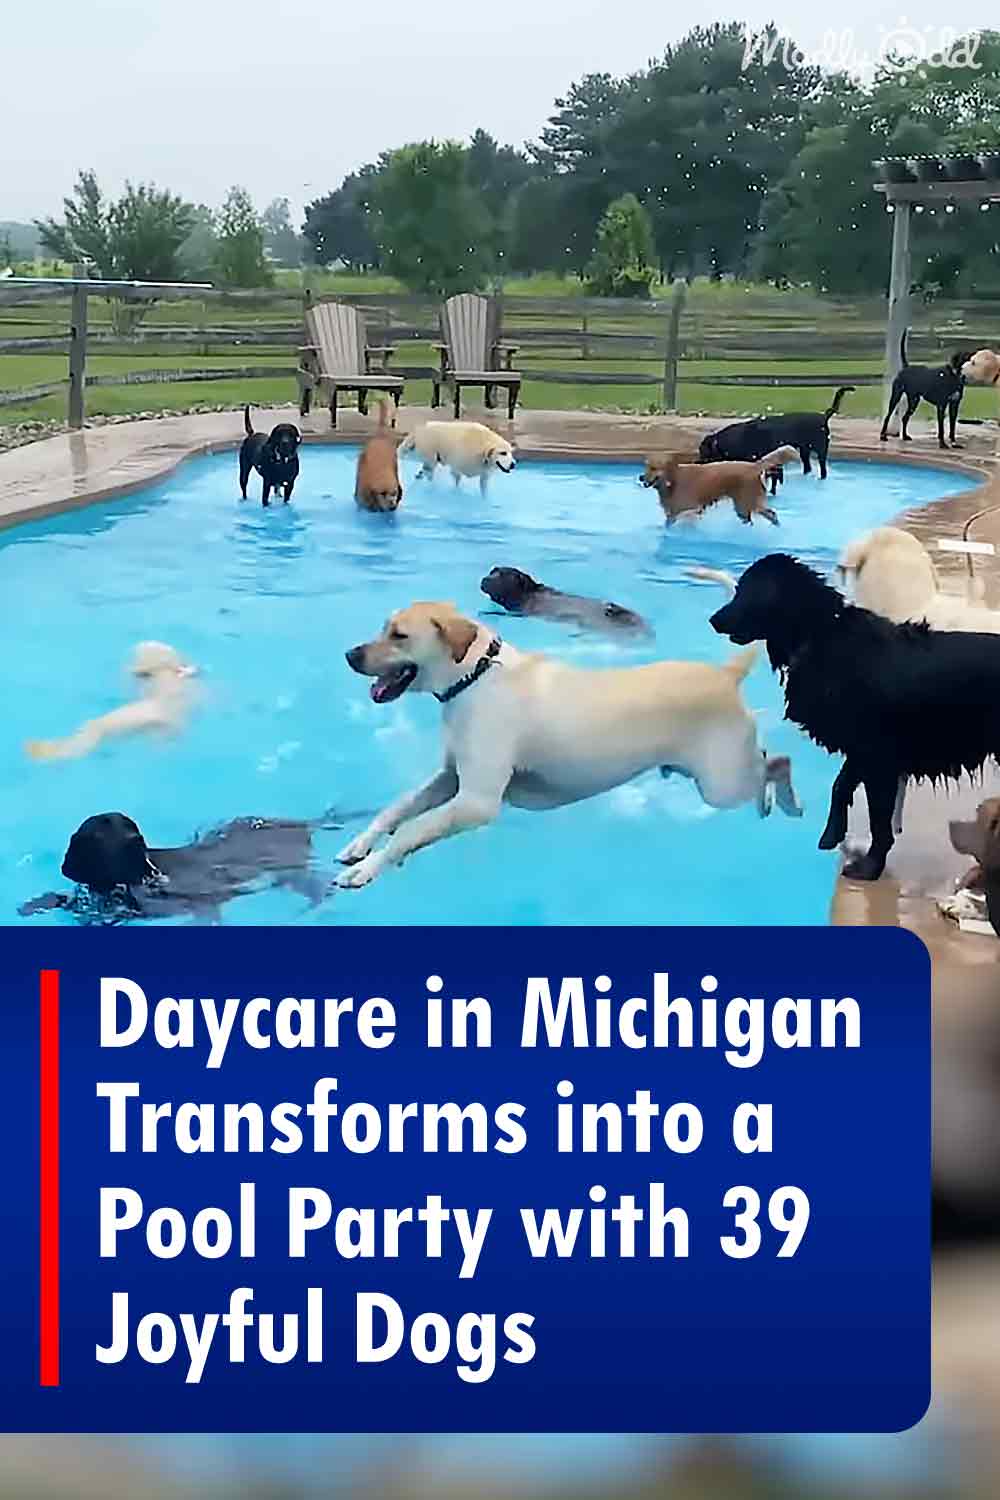 Daycare in Michigan Transforms into a Pool Party with 39 Joyful Dogs